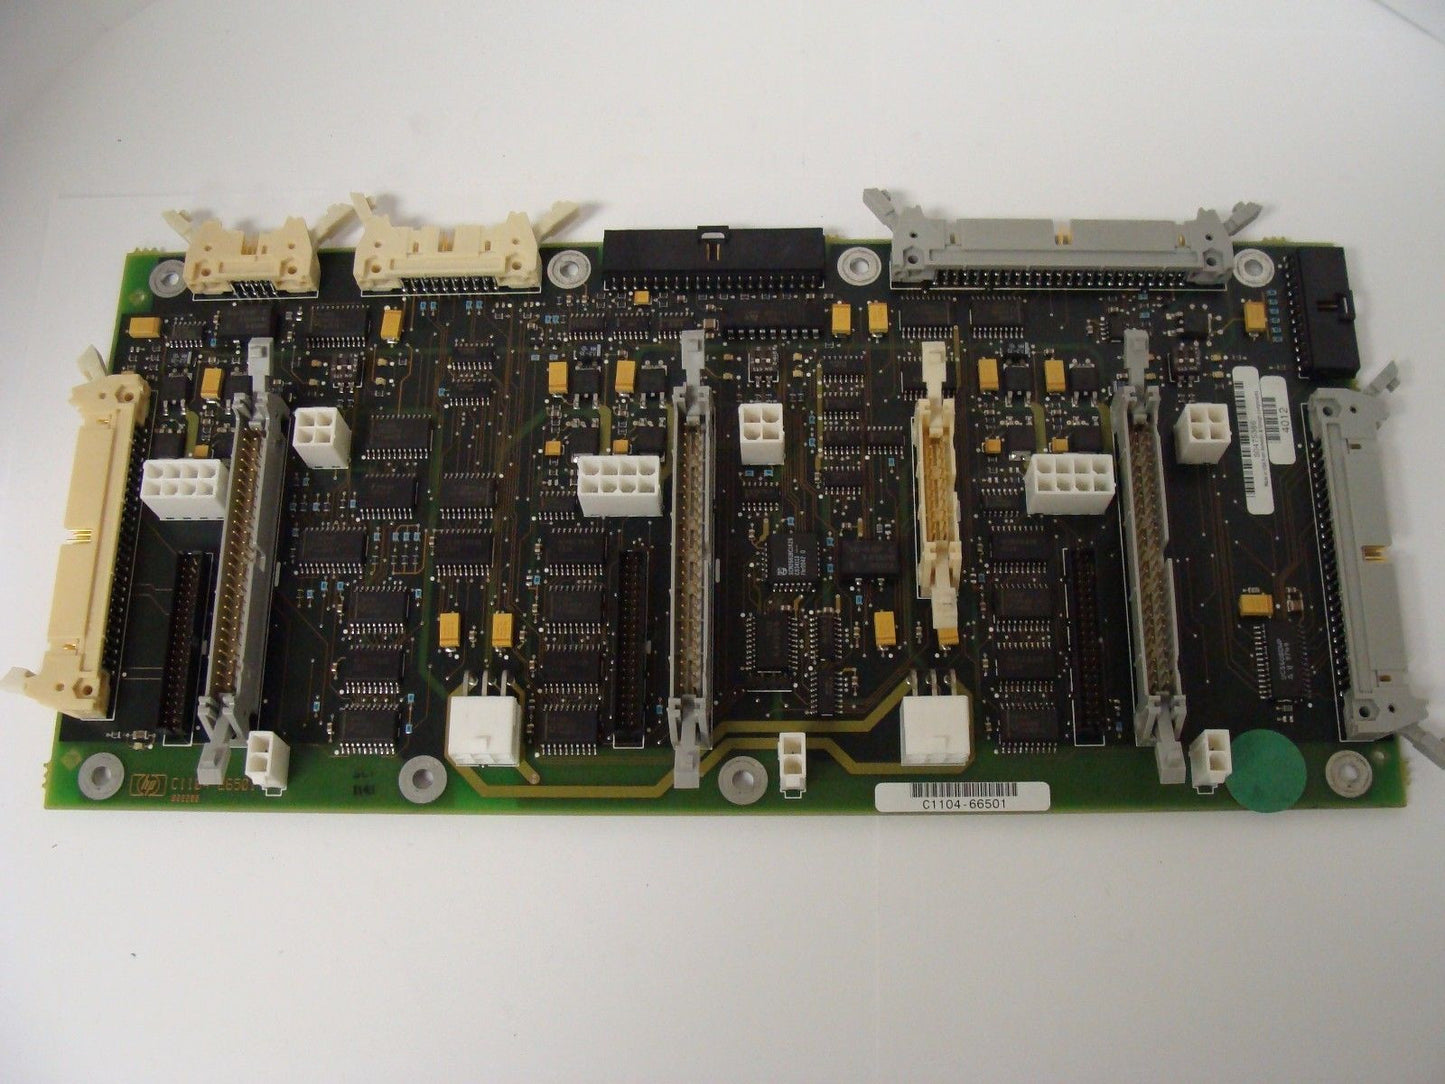 HP C1110-60004 2200MX Optical Library upper interposer board - Good Condition! - Micro Technologies (yourdrives.com)